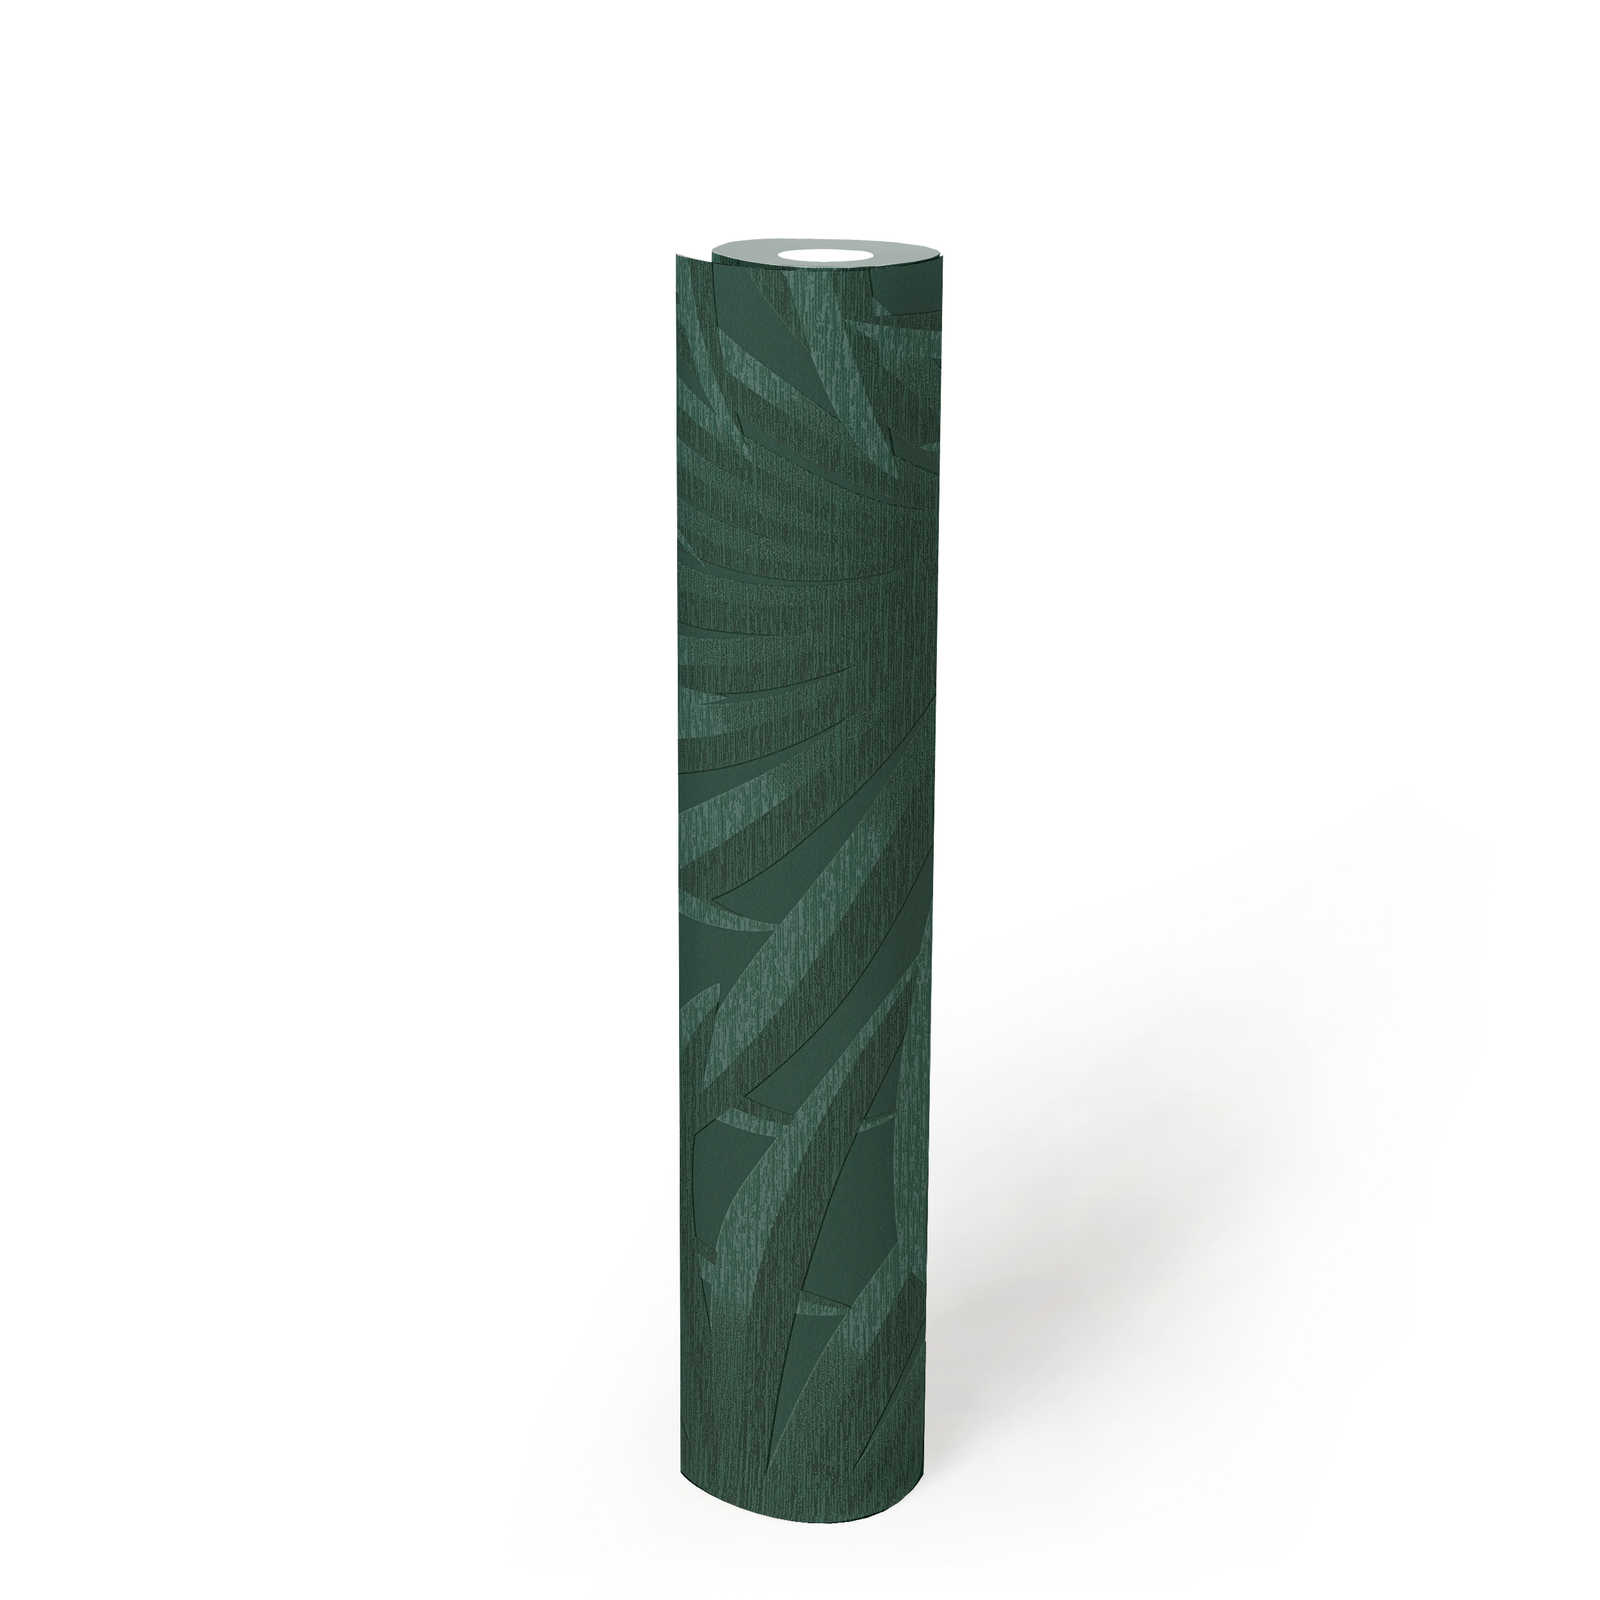             Non-woven wallpaper with jungle pattern - green
        